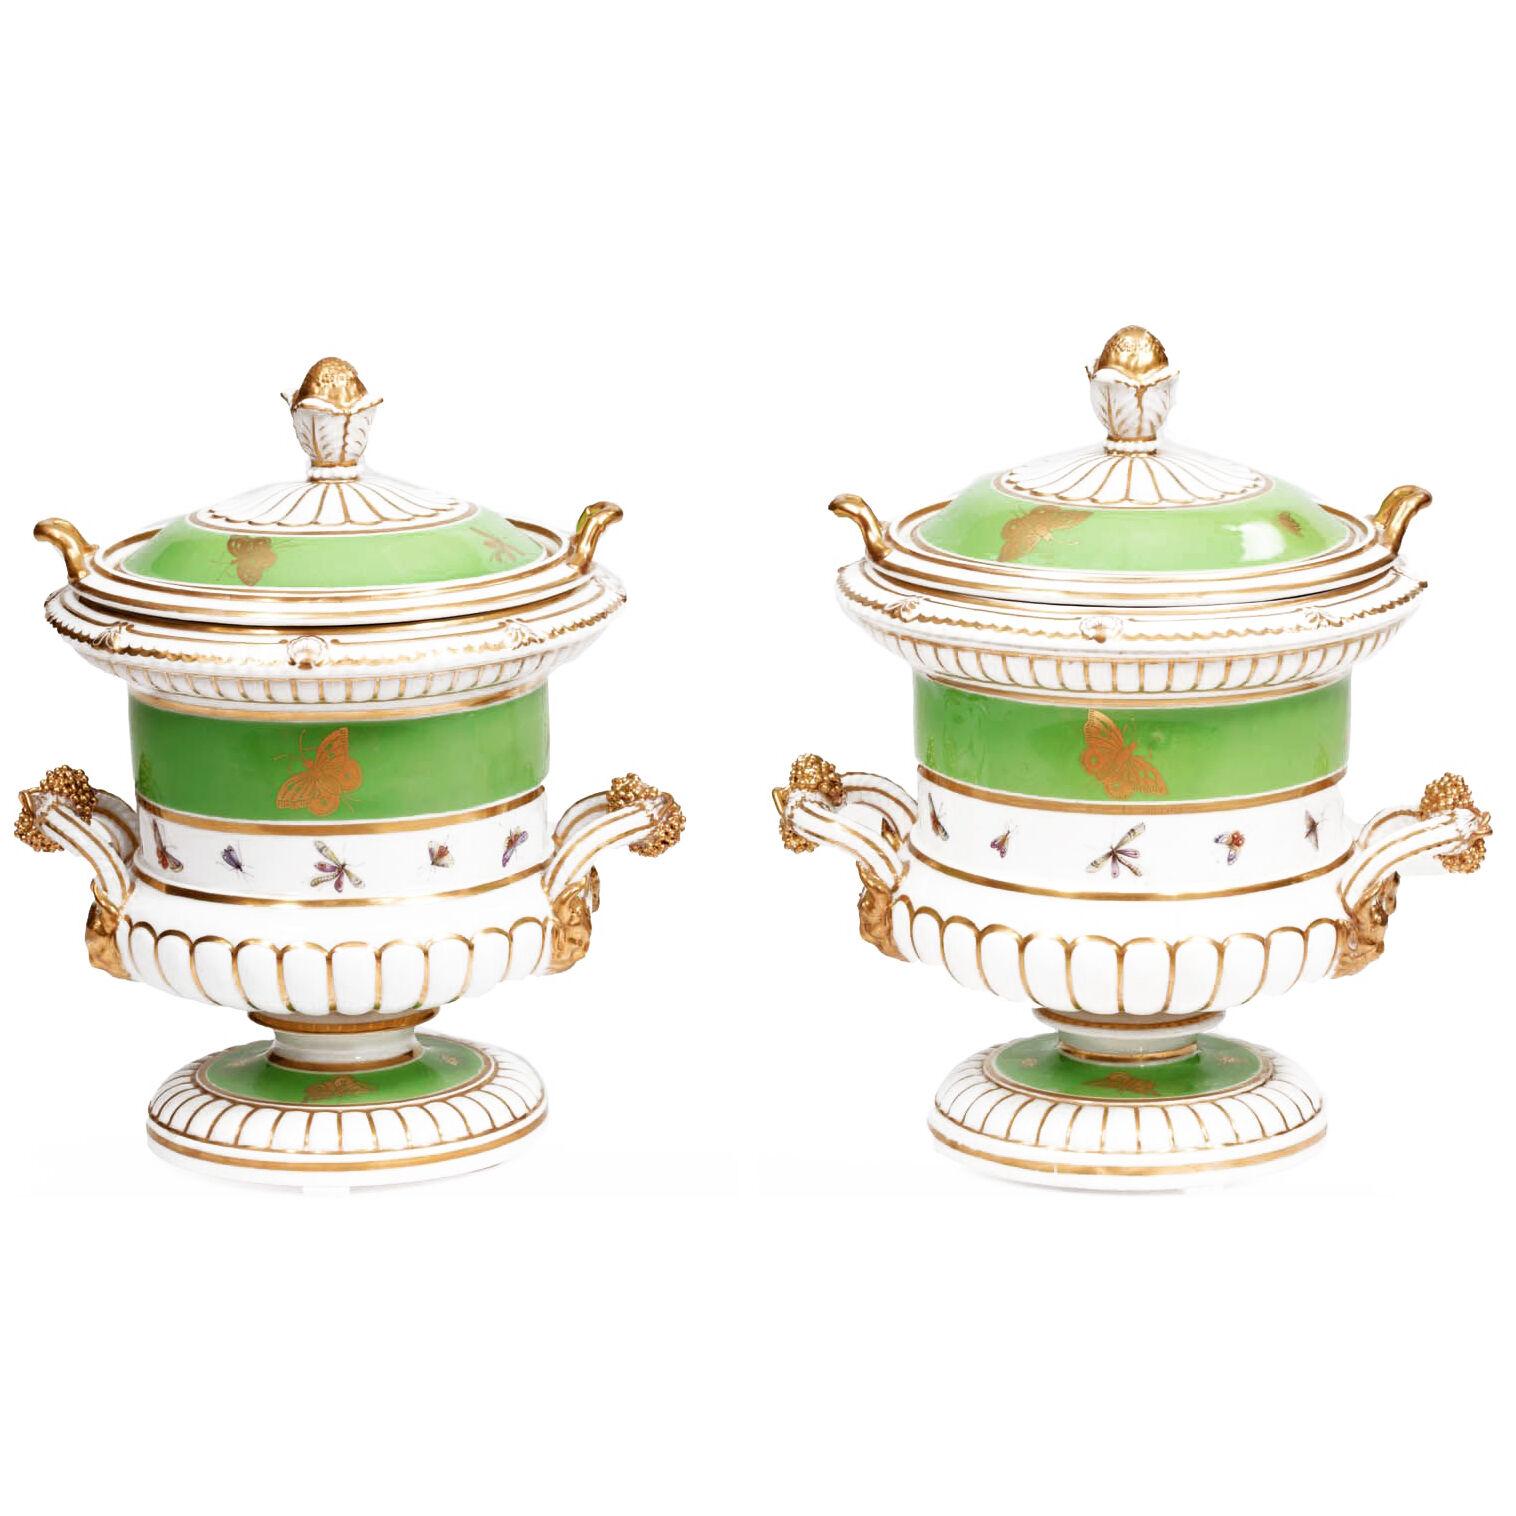 Pair of 19th Century Green & White Ice Pails by Chamberlain of Worcester